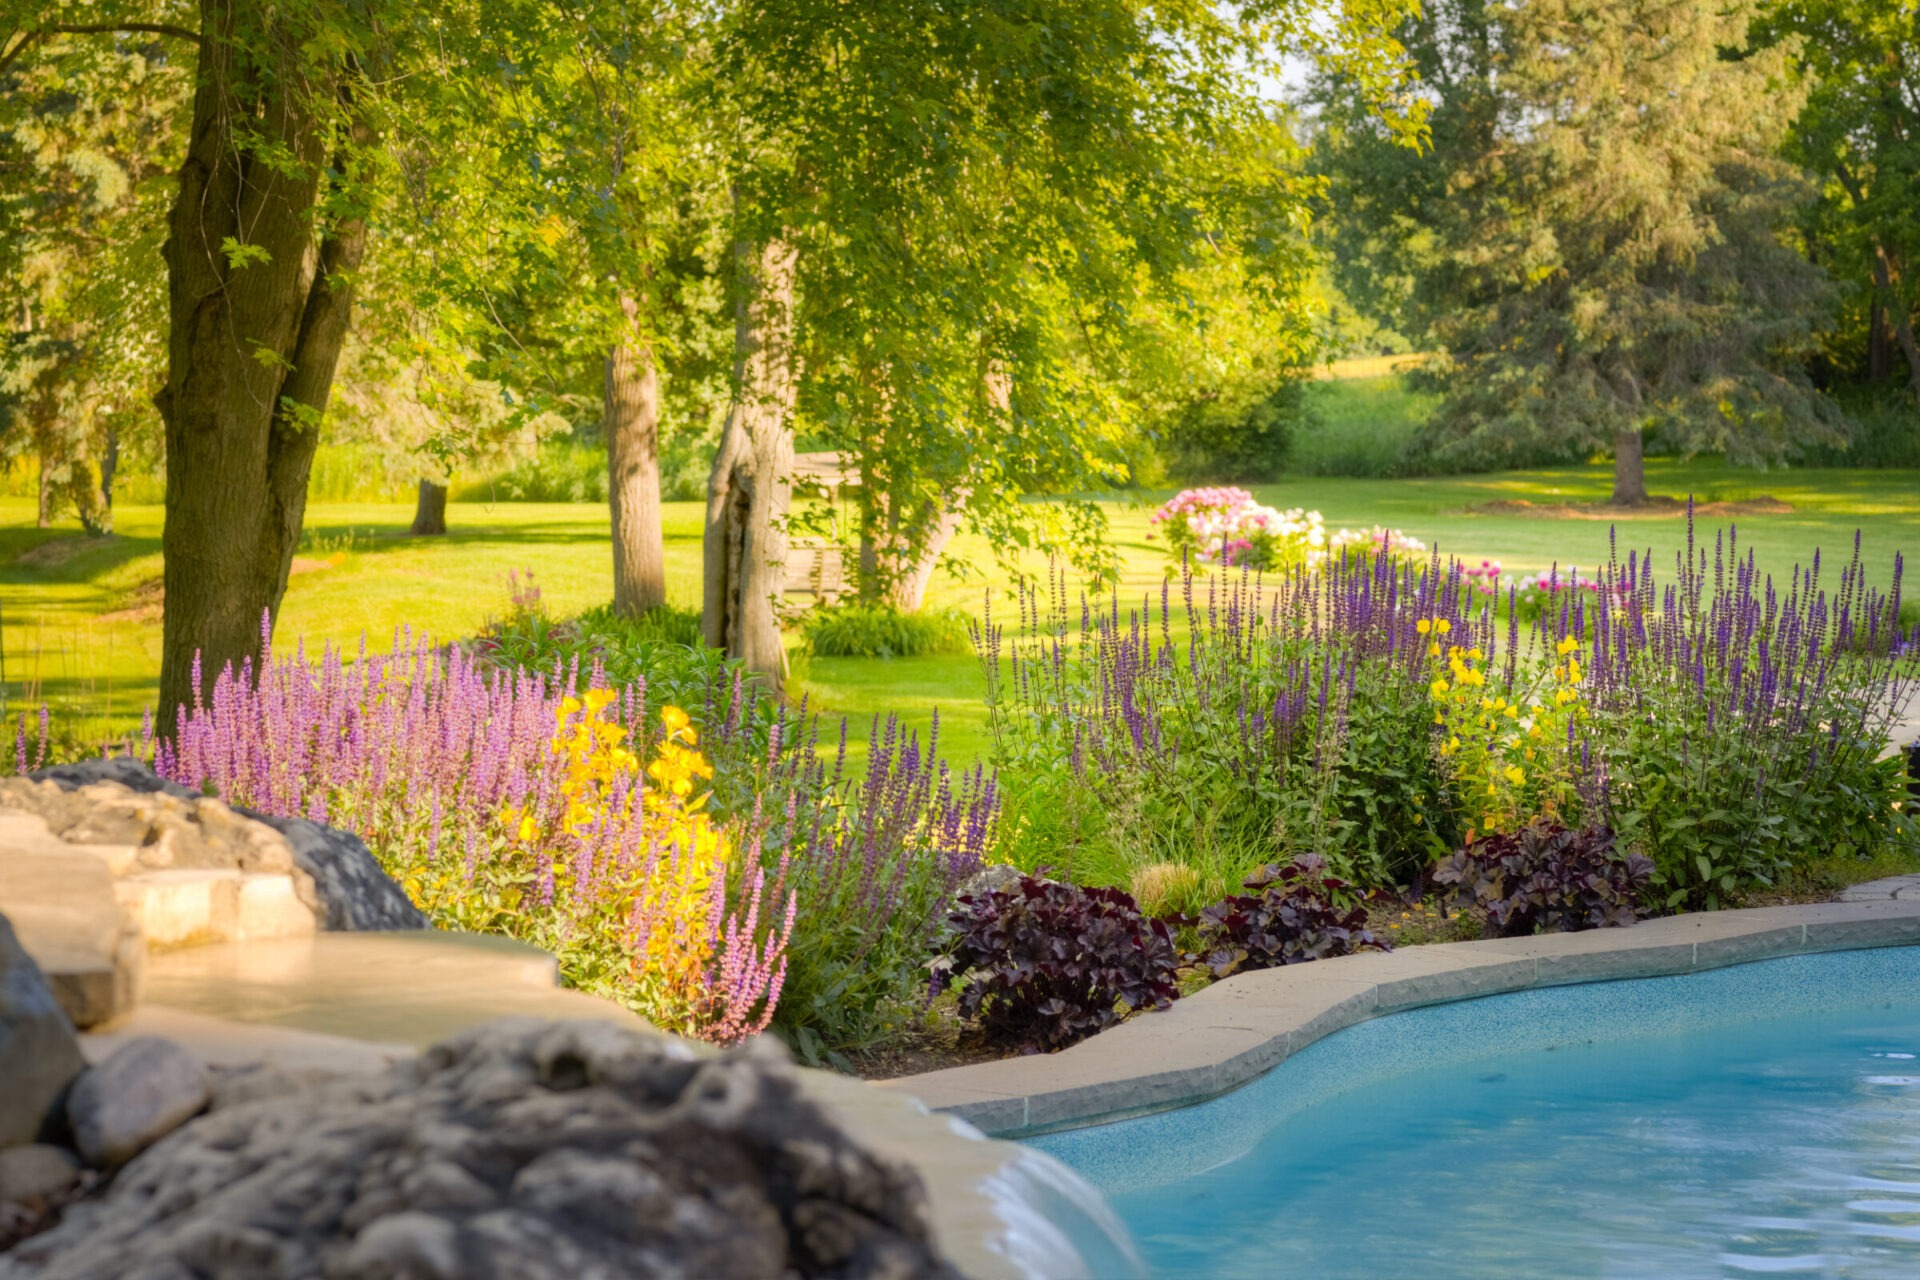 This image shows a tranquil garden with blooming purple flowers, lush greenery, and a glimpse of a serene, curving pool in the foreground.